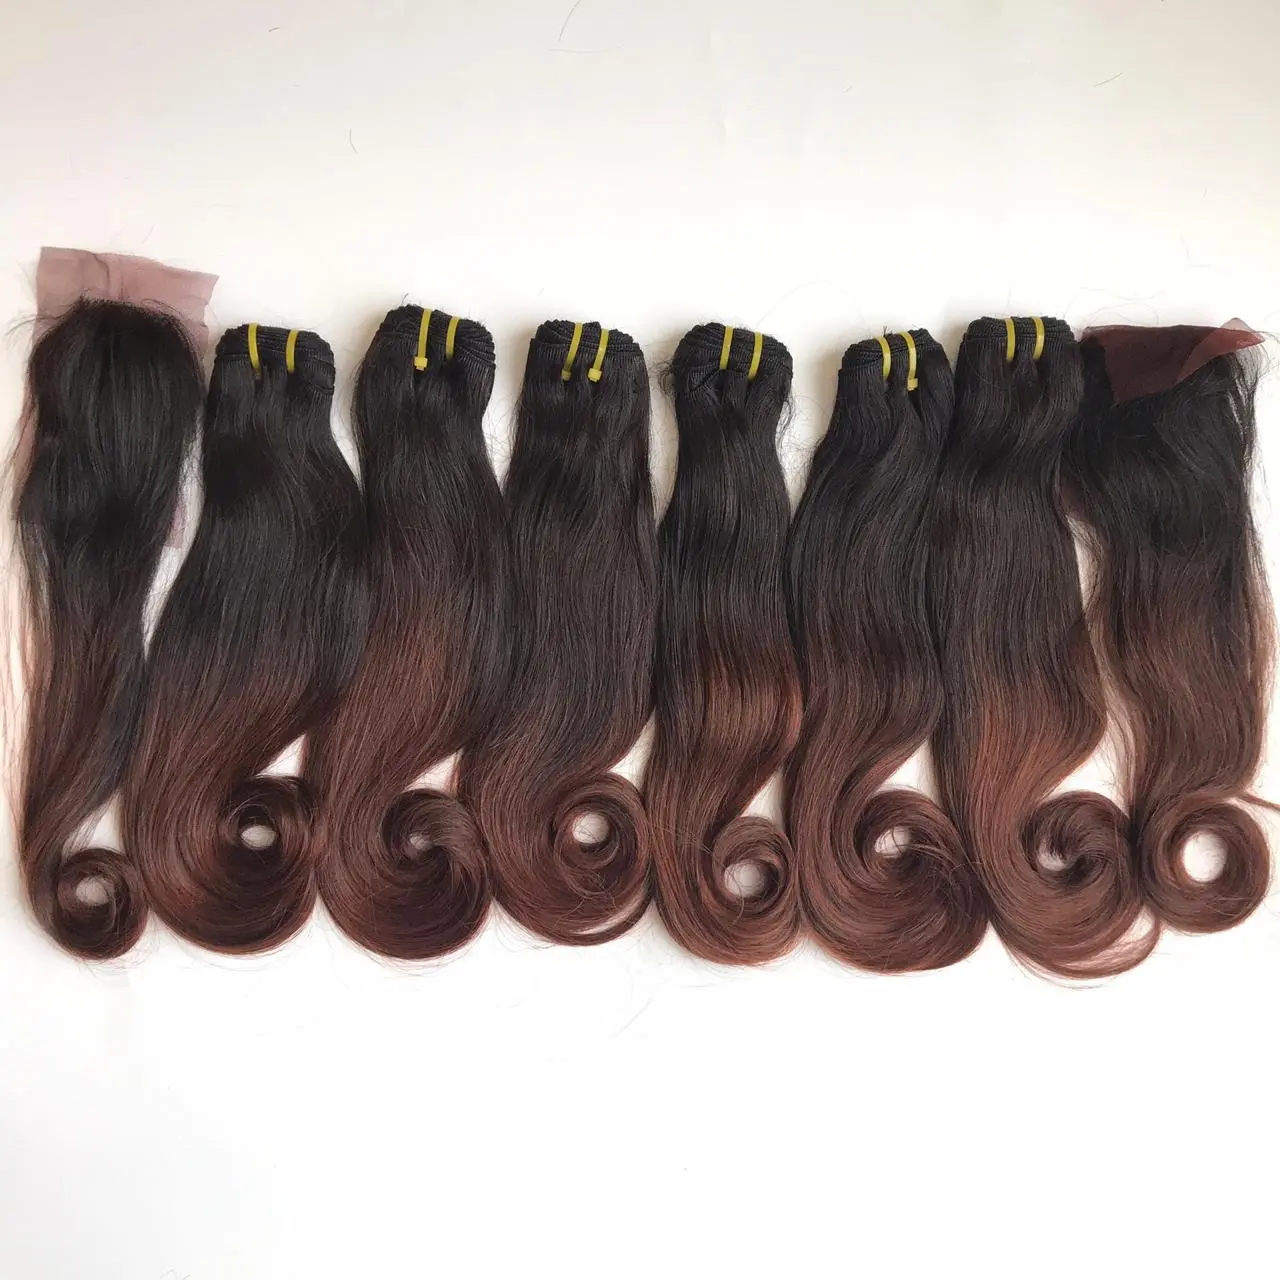 Hook Curly All Color Hair Extensions High Quality Remy Hair 100% Real Vietnam Human Hair Wholesale Price